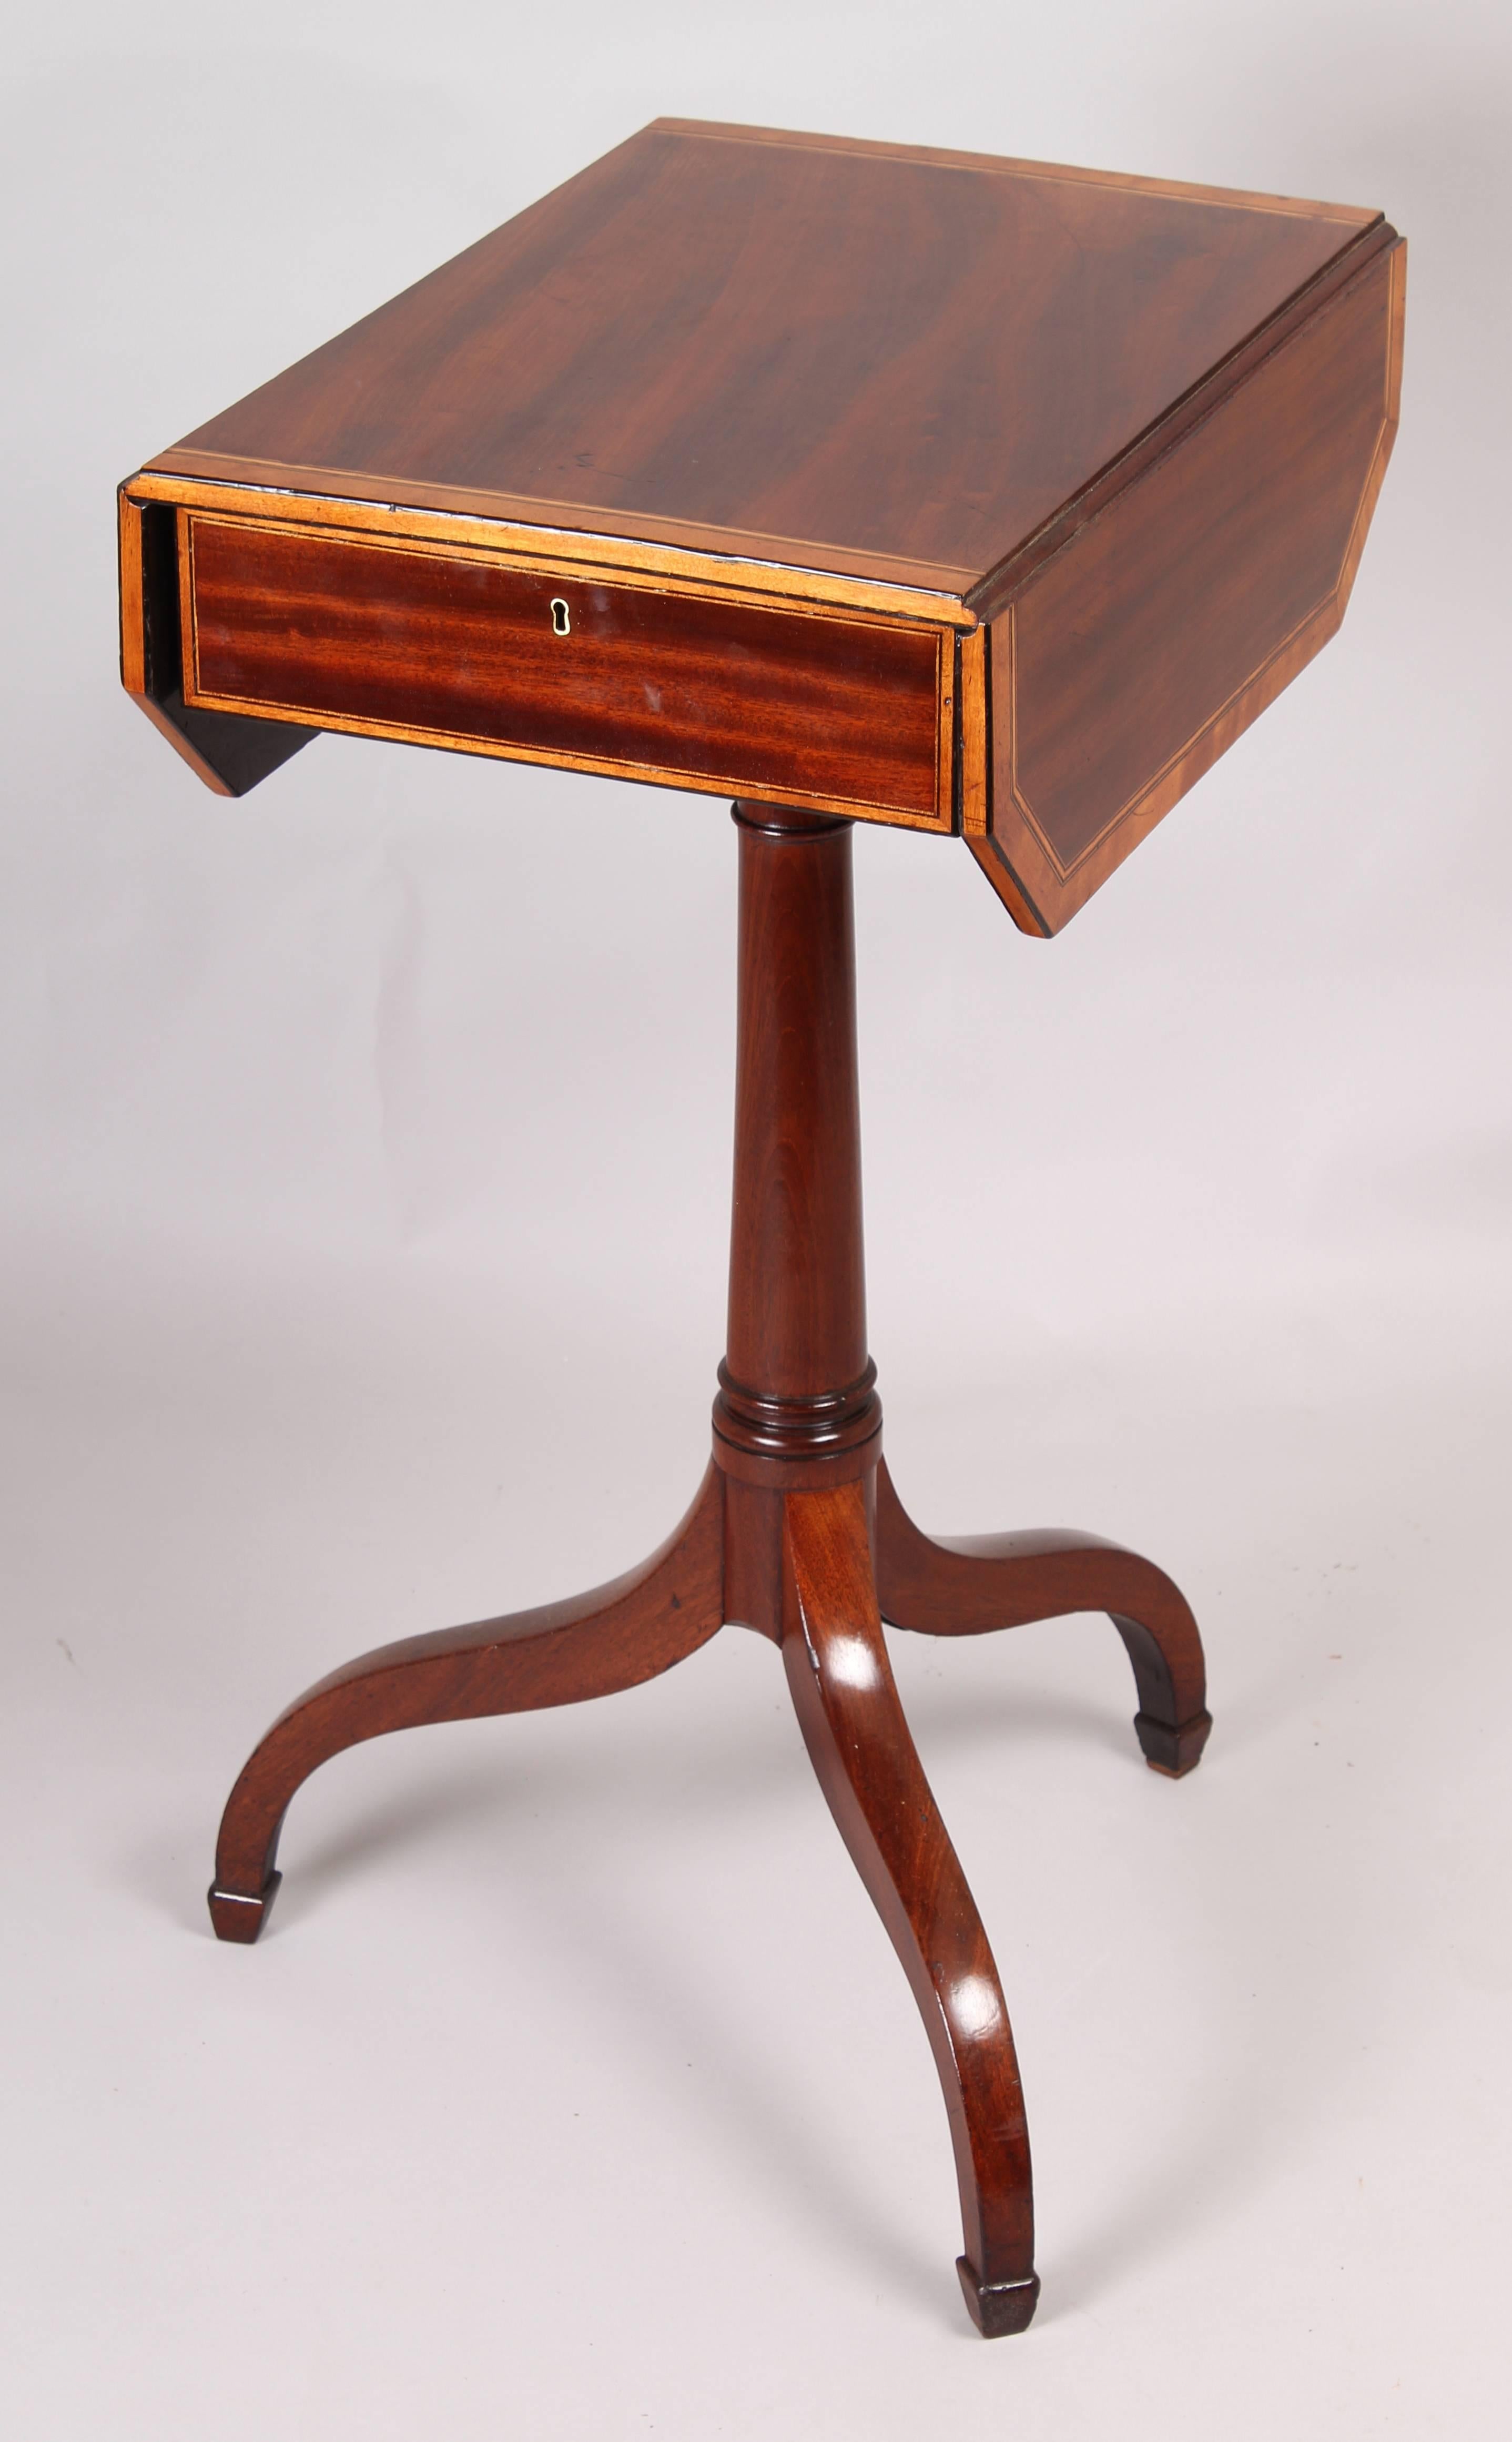 George III period mahogany small Pembroke work-table; the drop-leaf top with angled corners and satinwood banded edges, fitted with a cedar-lined drawer and on a simple turned shaft and a crabstock tripod base, circa 1800.